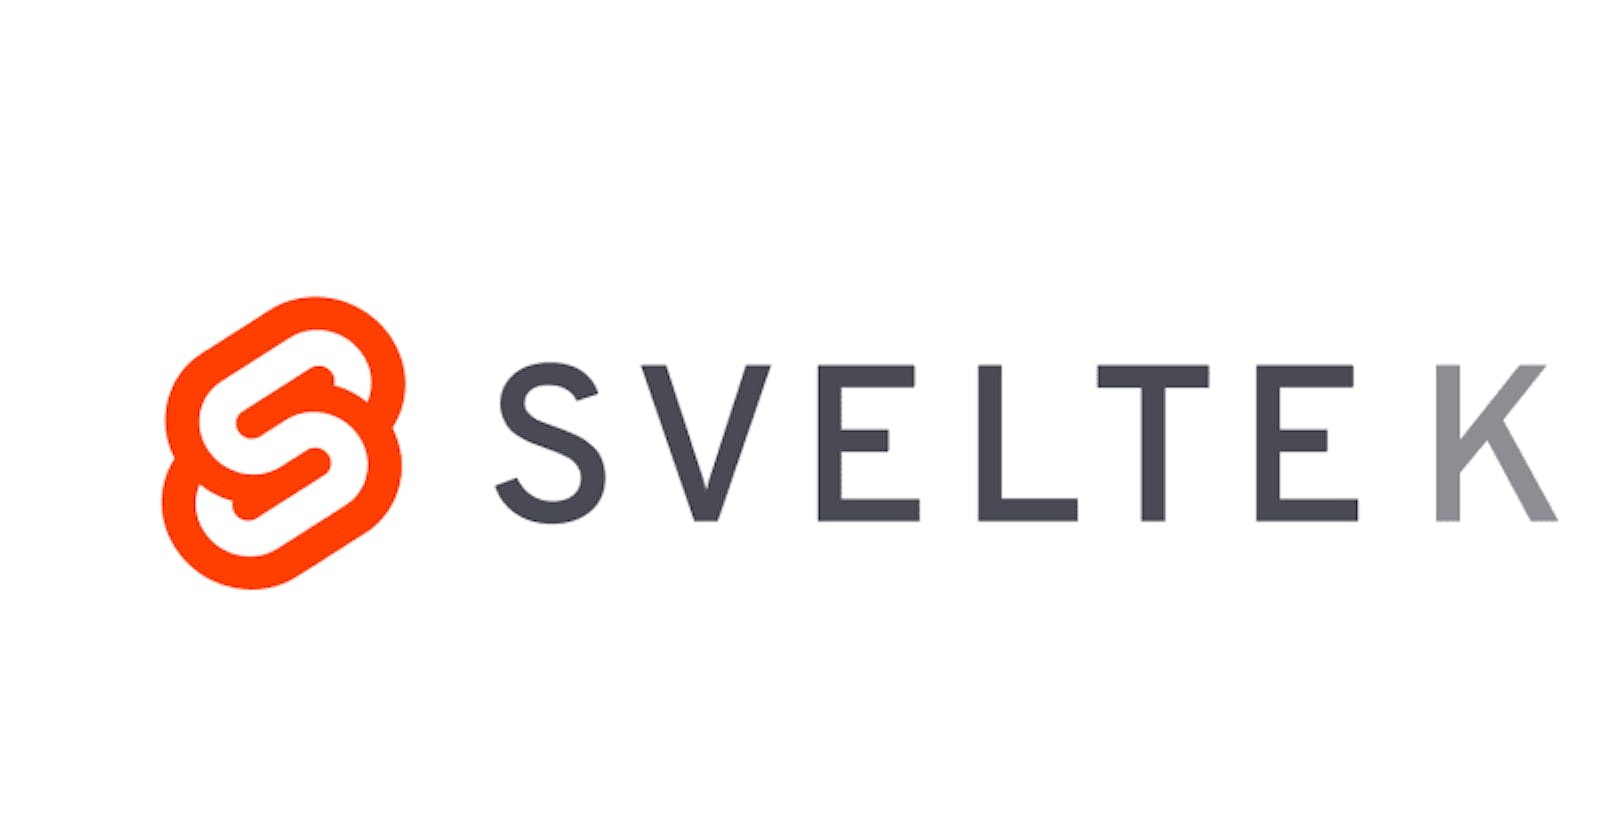 Getting Started with Svelte and Svelte Kit: A Comprehensive Guide